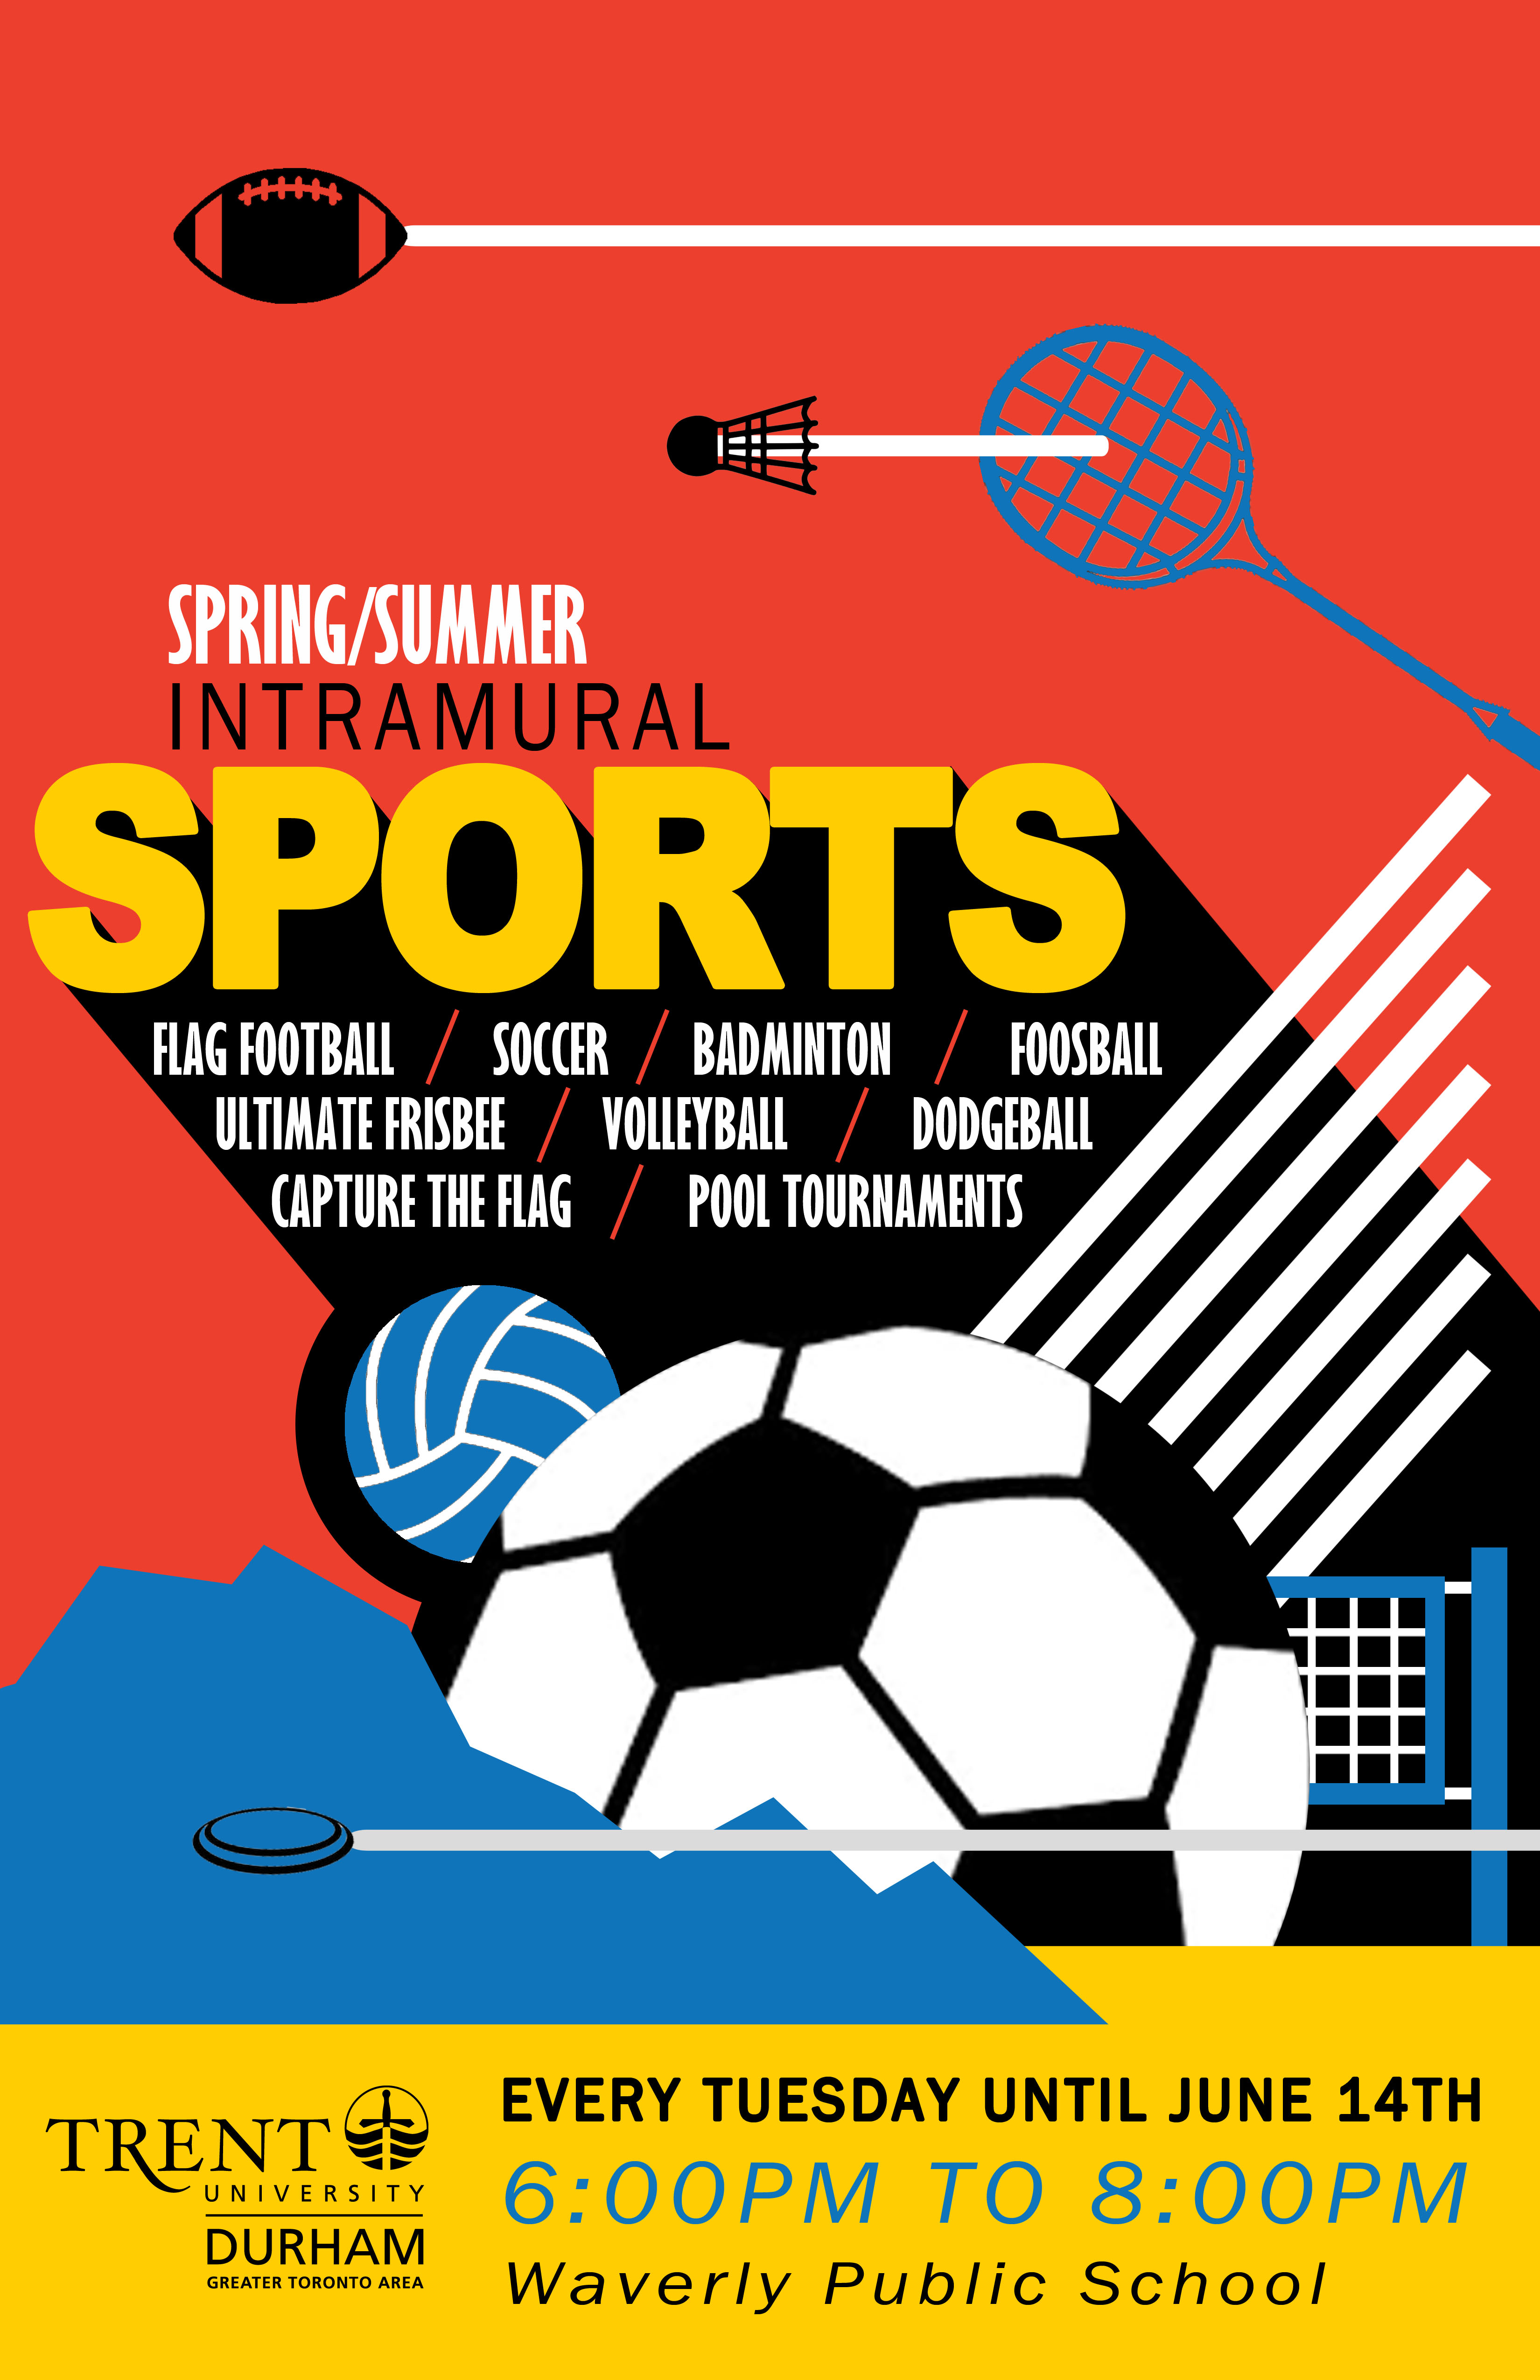 Intramural Sports every Tuesday from 6pm to 8pm at Waverly P.S. until June 14th.